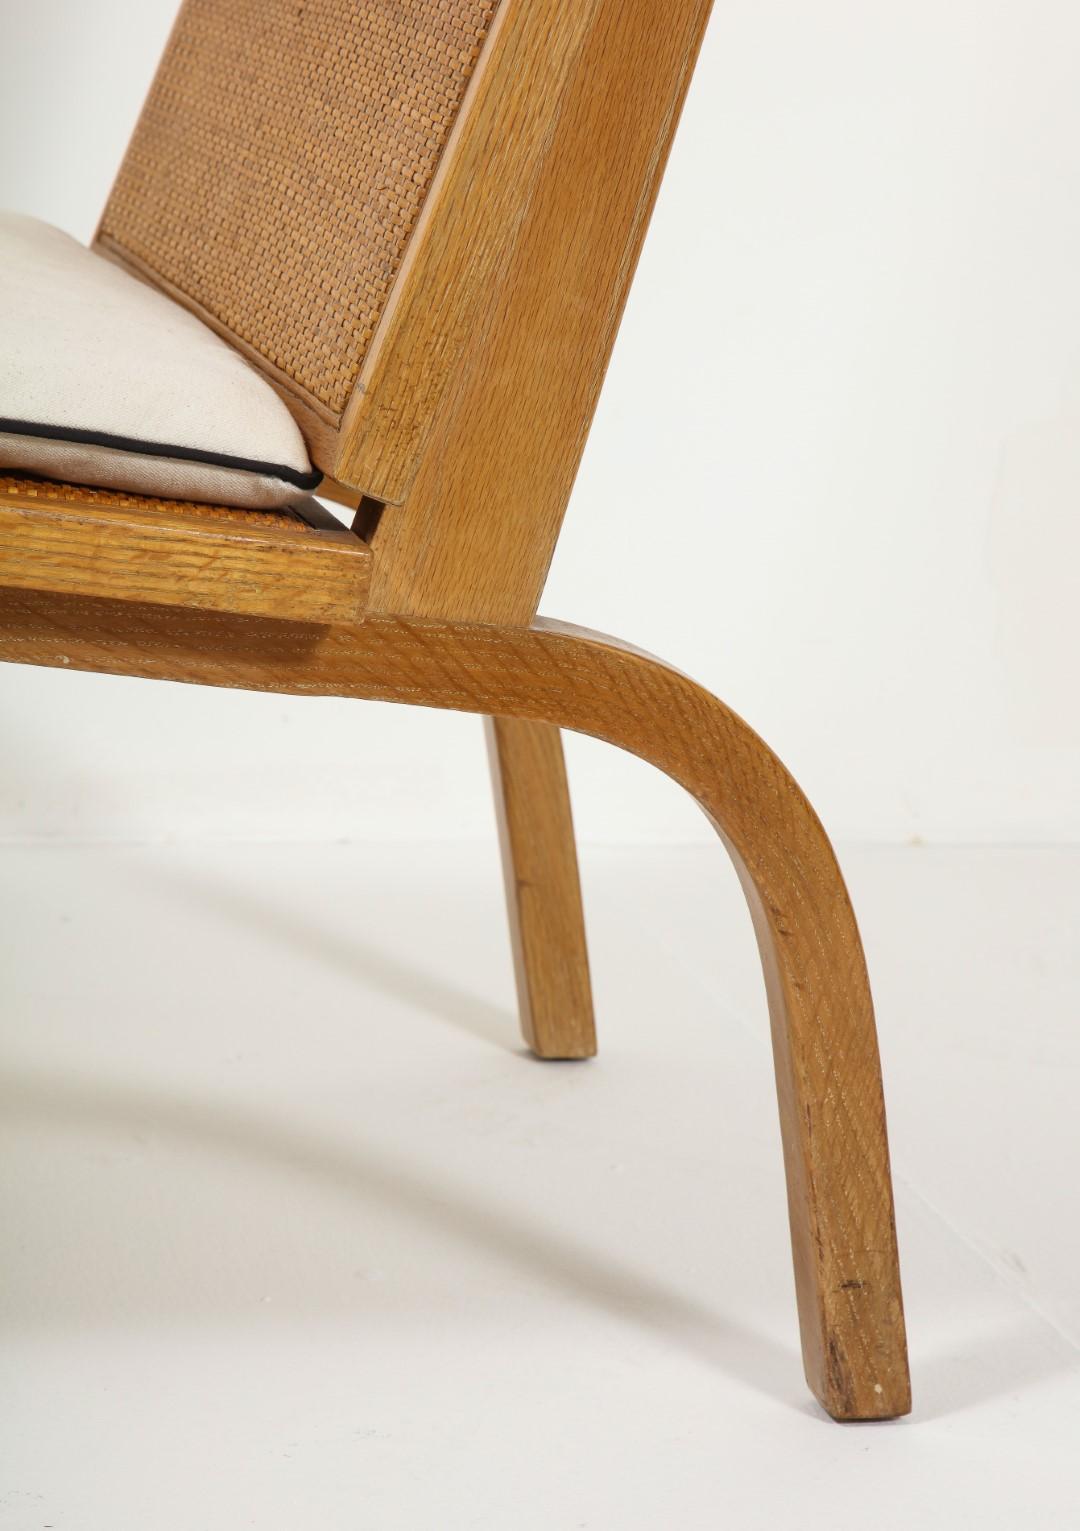 American Midcentury Woven Oak Lounge Chair by Edward Durell Stone for Fulbright For Sale